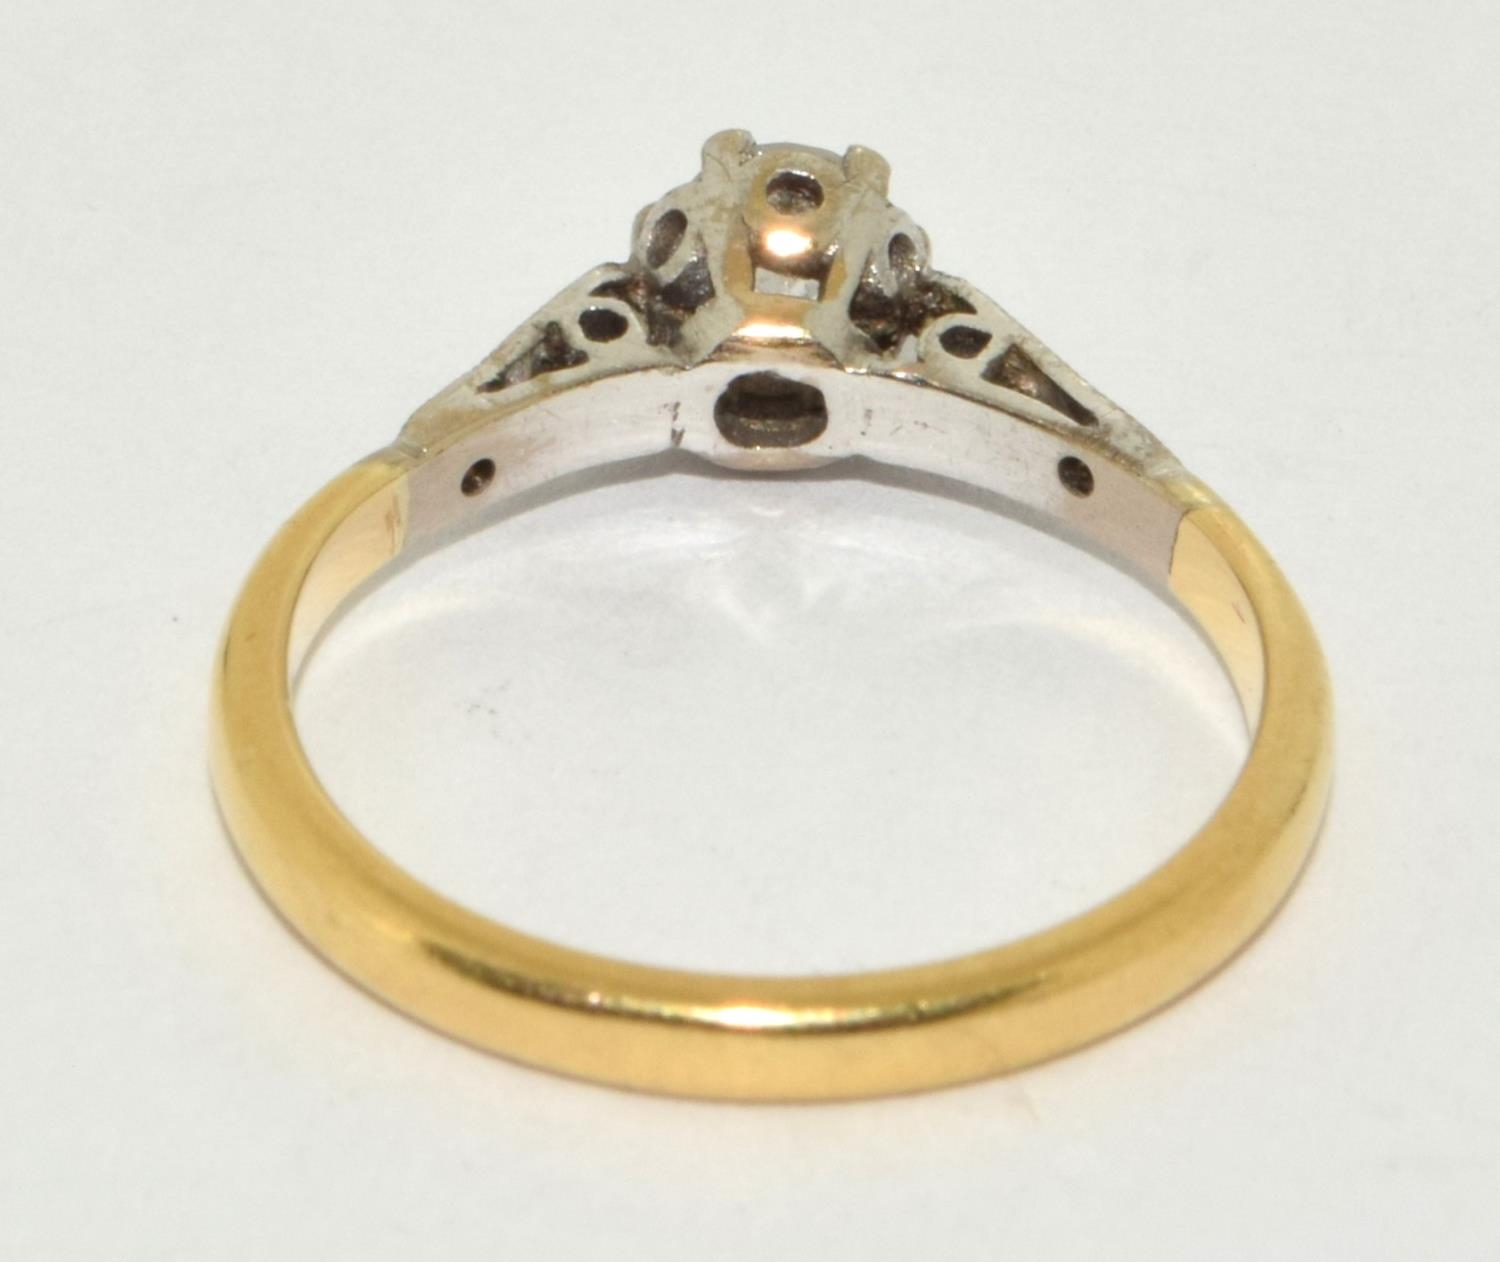 An old 18ct diamond solitaire 0.25ct minimum rose cut diamond shank ring Size L 1/2. - Image 3 of 5